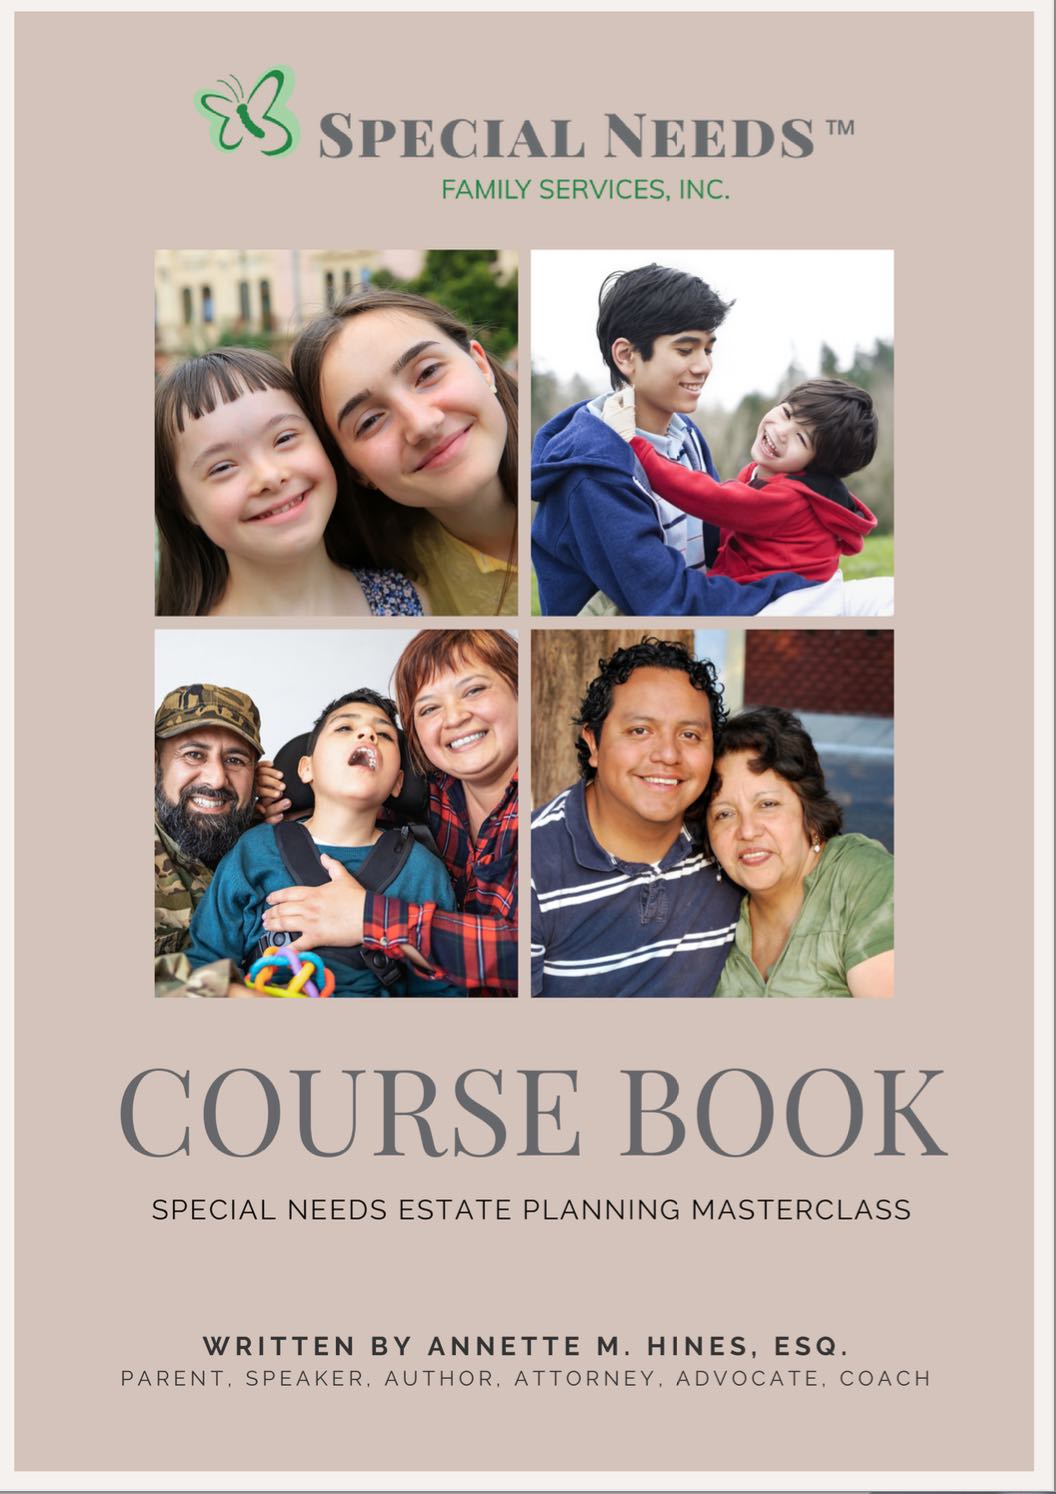 Special Needs Estate Planning Masterclass Course Book